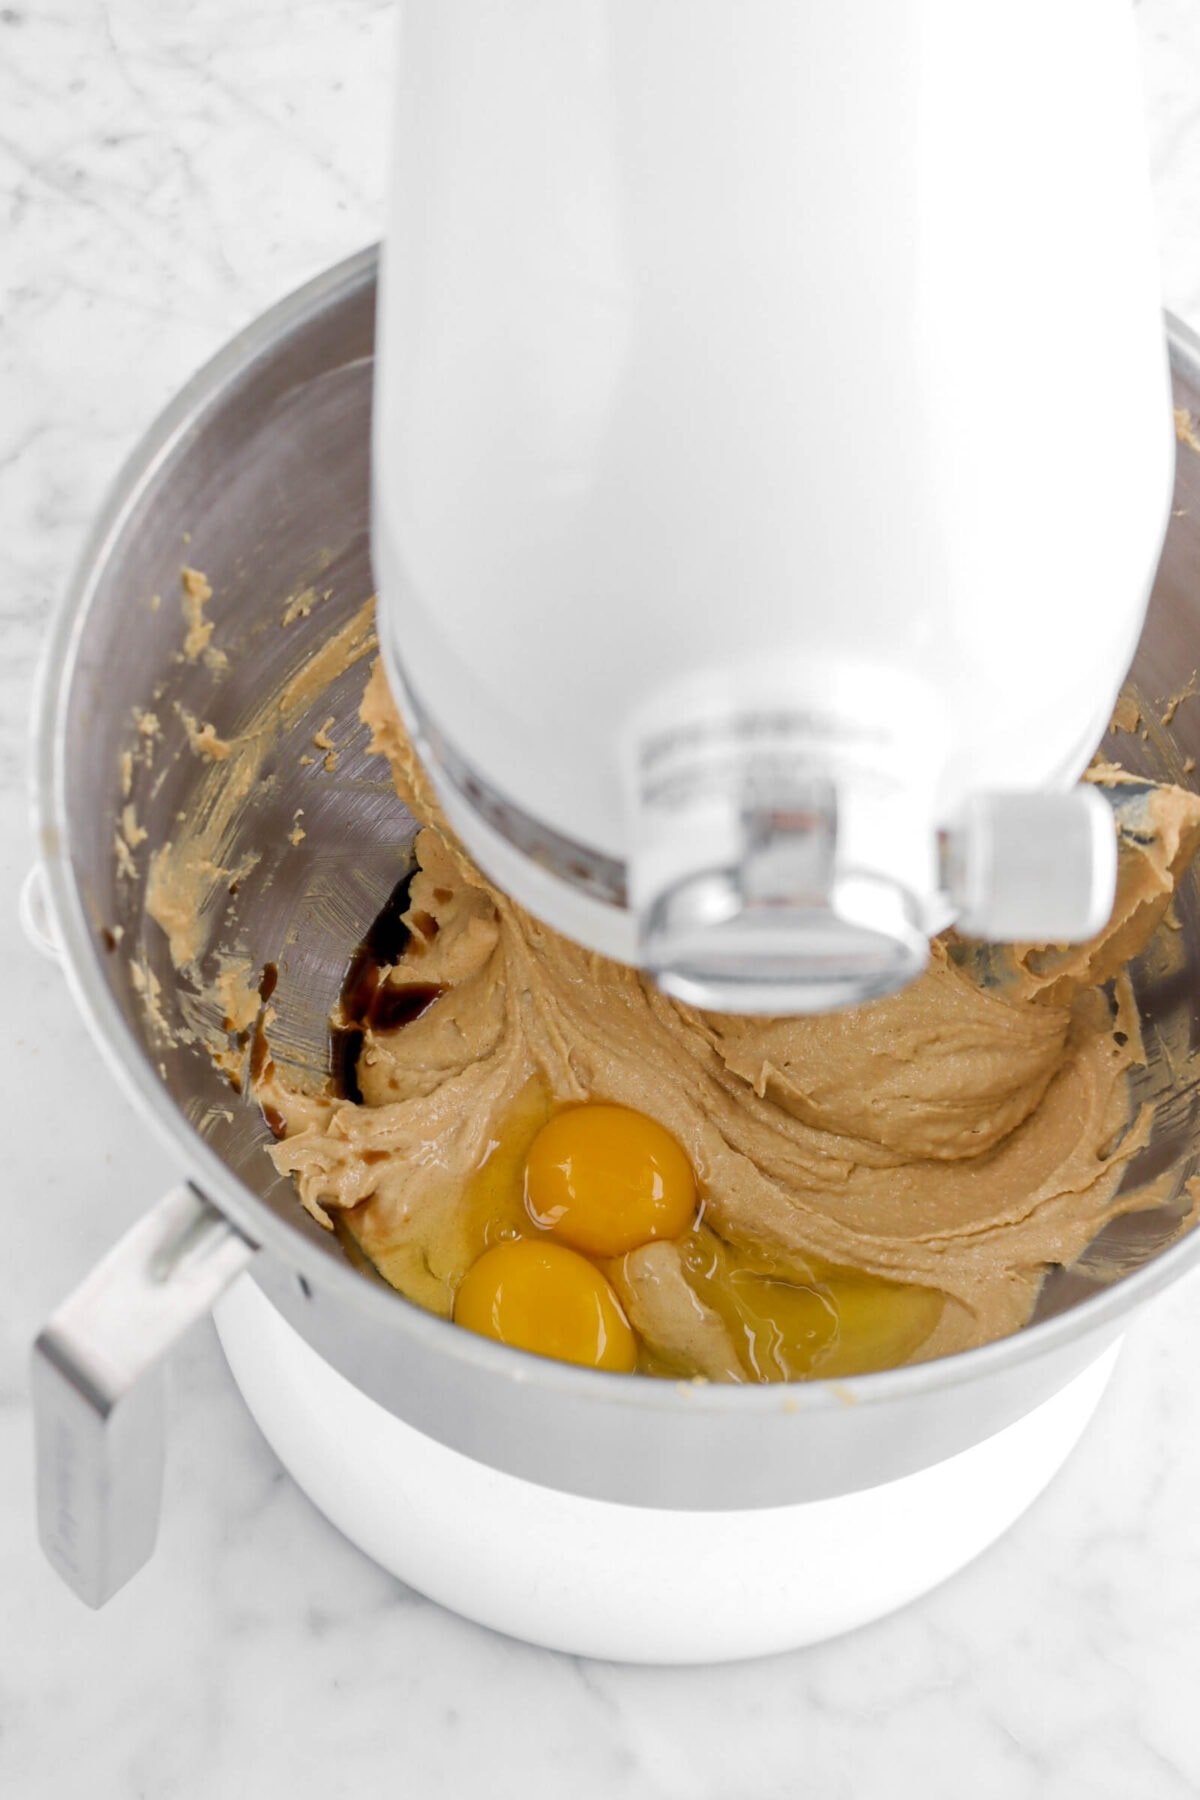 eggs and vanilla added to peanut butter mixture.